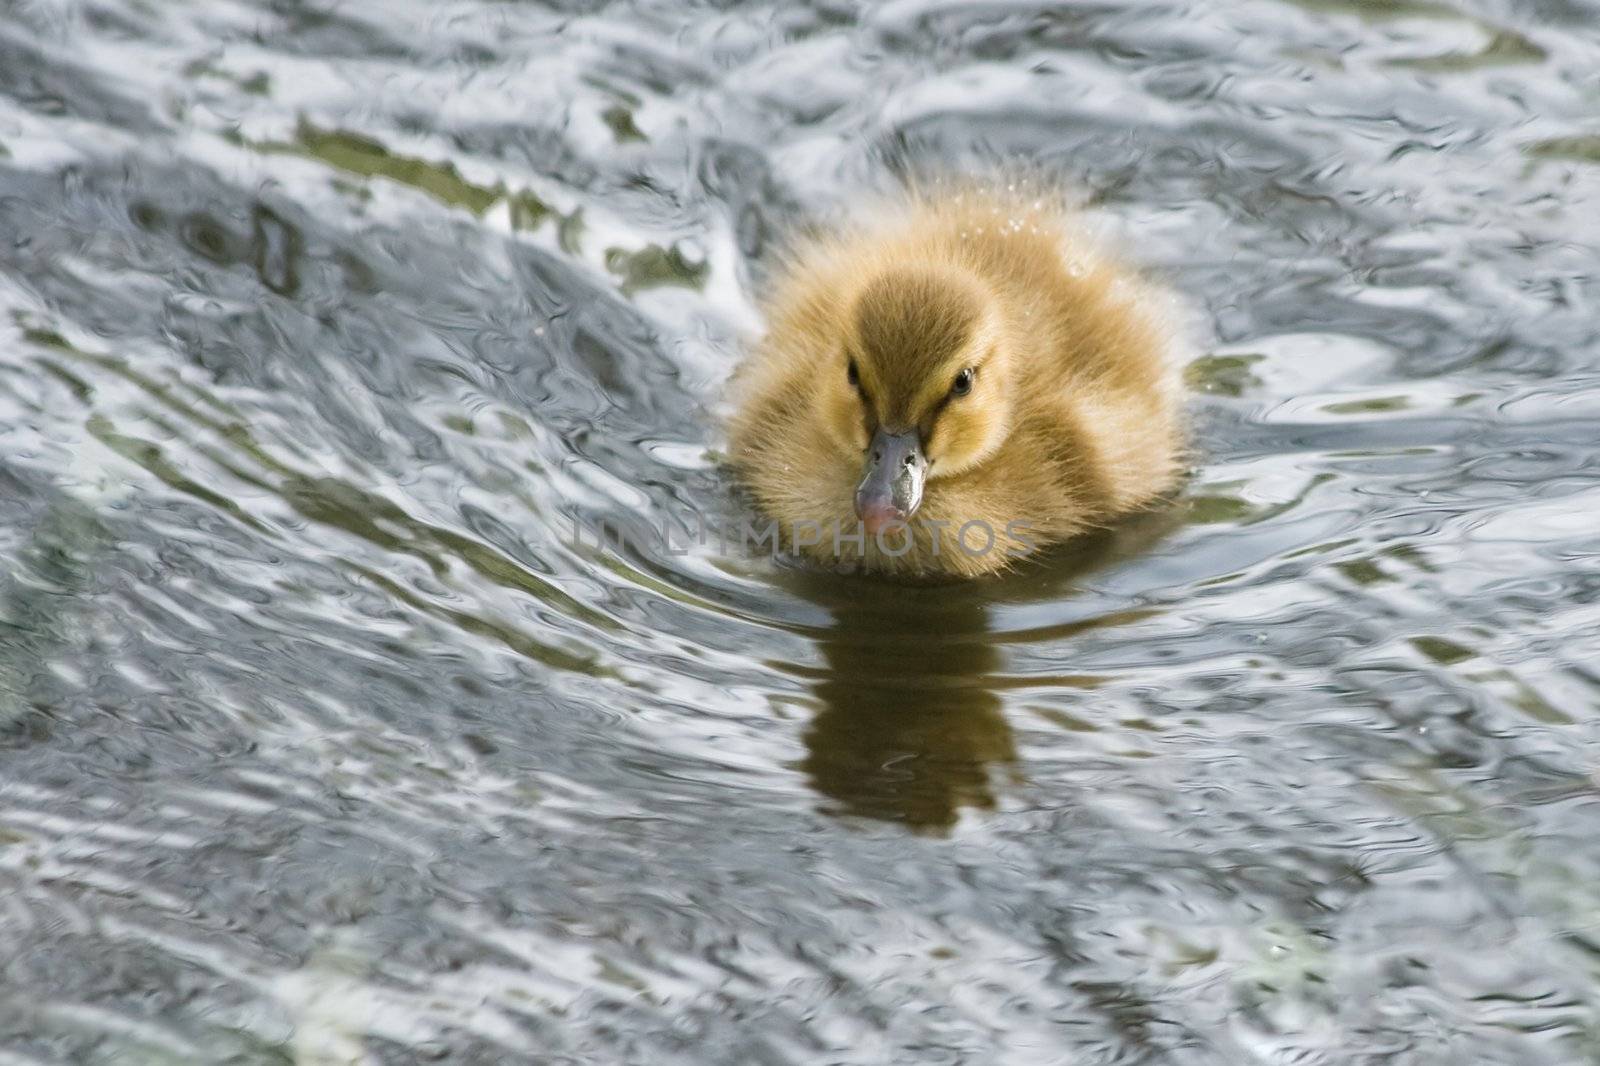 Nice little duckling swimming in silver water